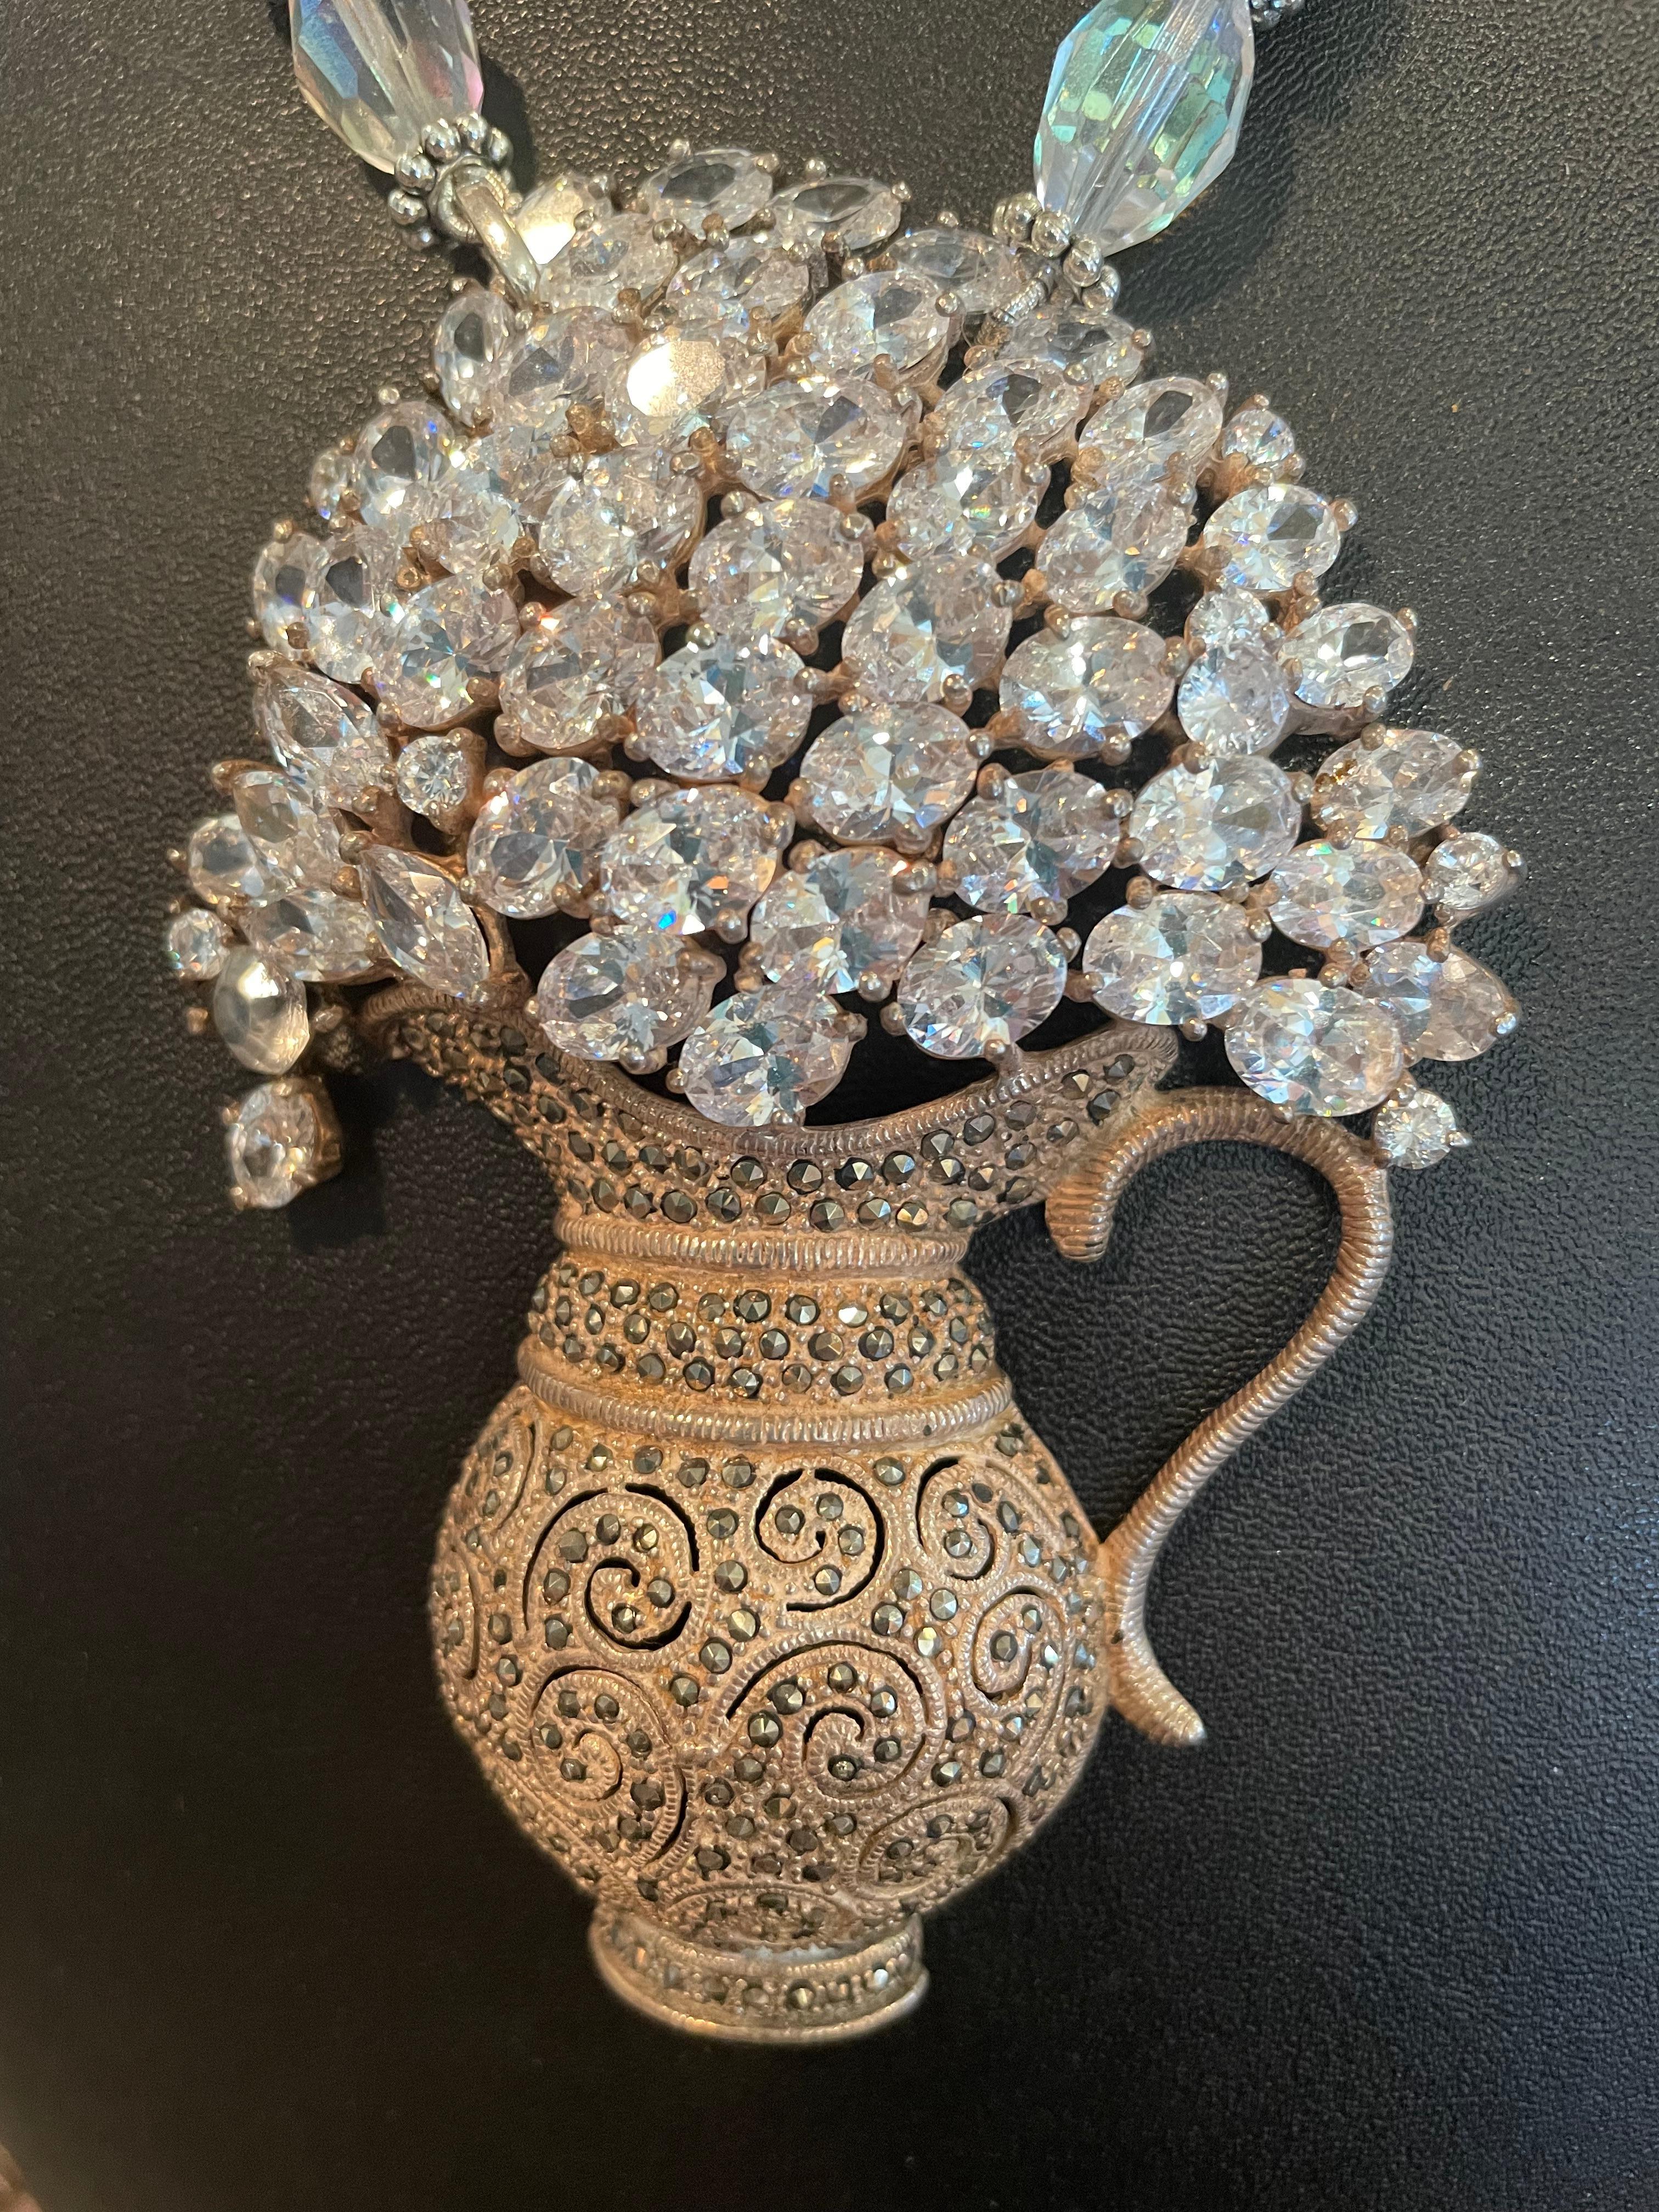 LB offers an Amazing, Stunning, Dramatic, one of a kind, handmade, original necklace. 
The centerpiece is an incredible Vintage, Sterling Silver, Marcasite, and cut crystal Urn Brooch that hang  on a strand of hand cut  Rock Crystal rondelles beads,